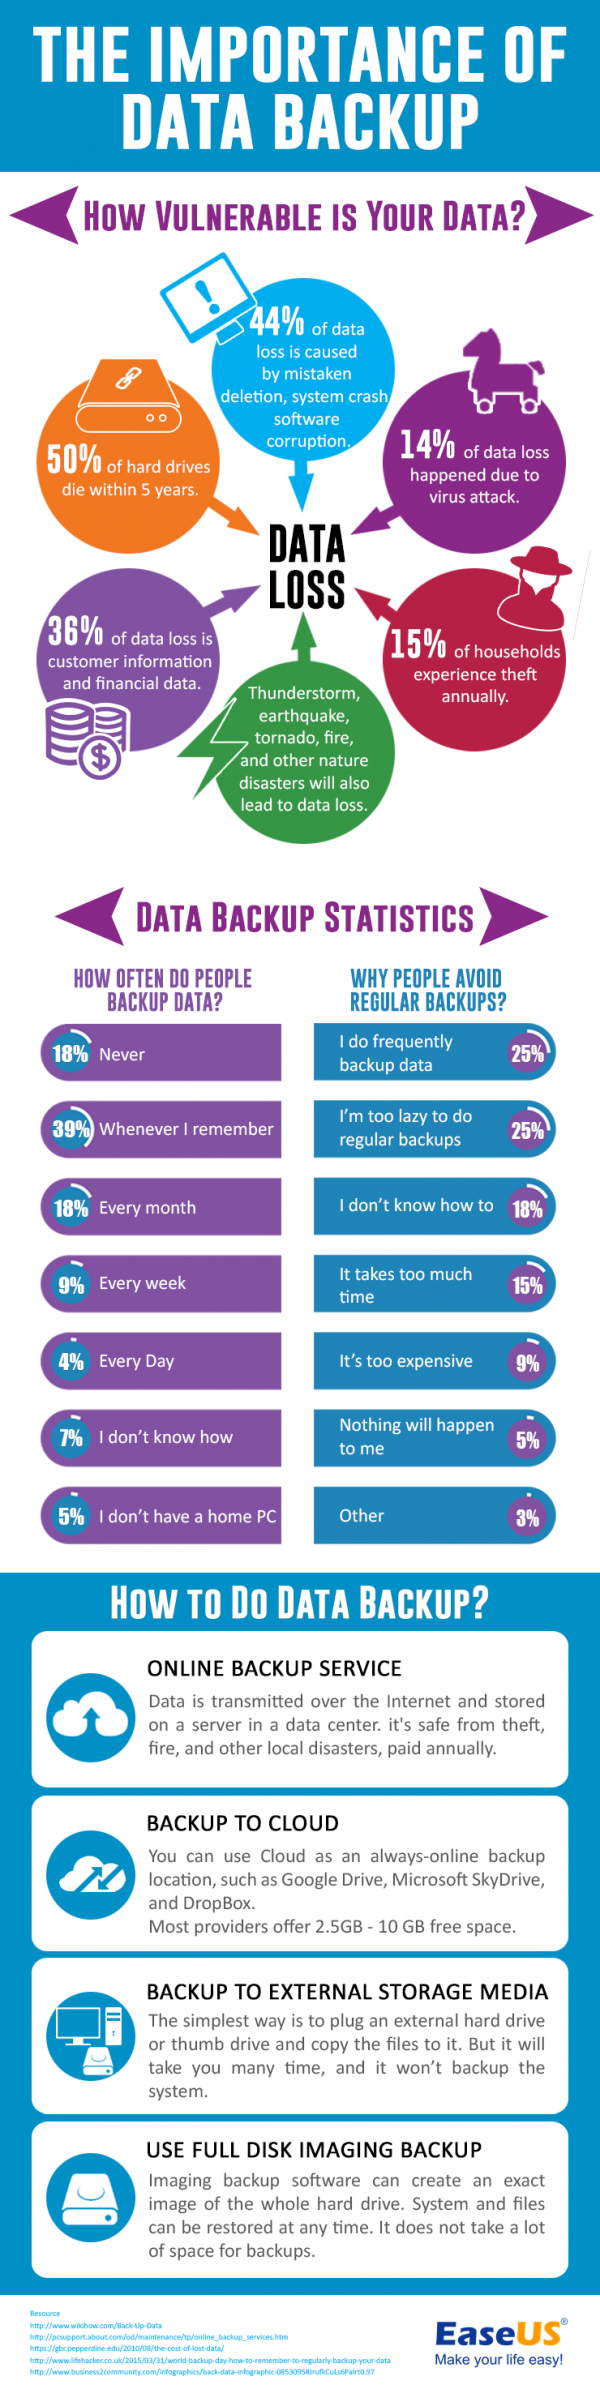 The Importance of Data Backup [Infographic]